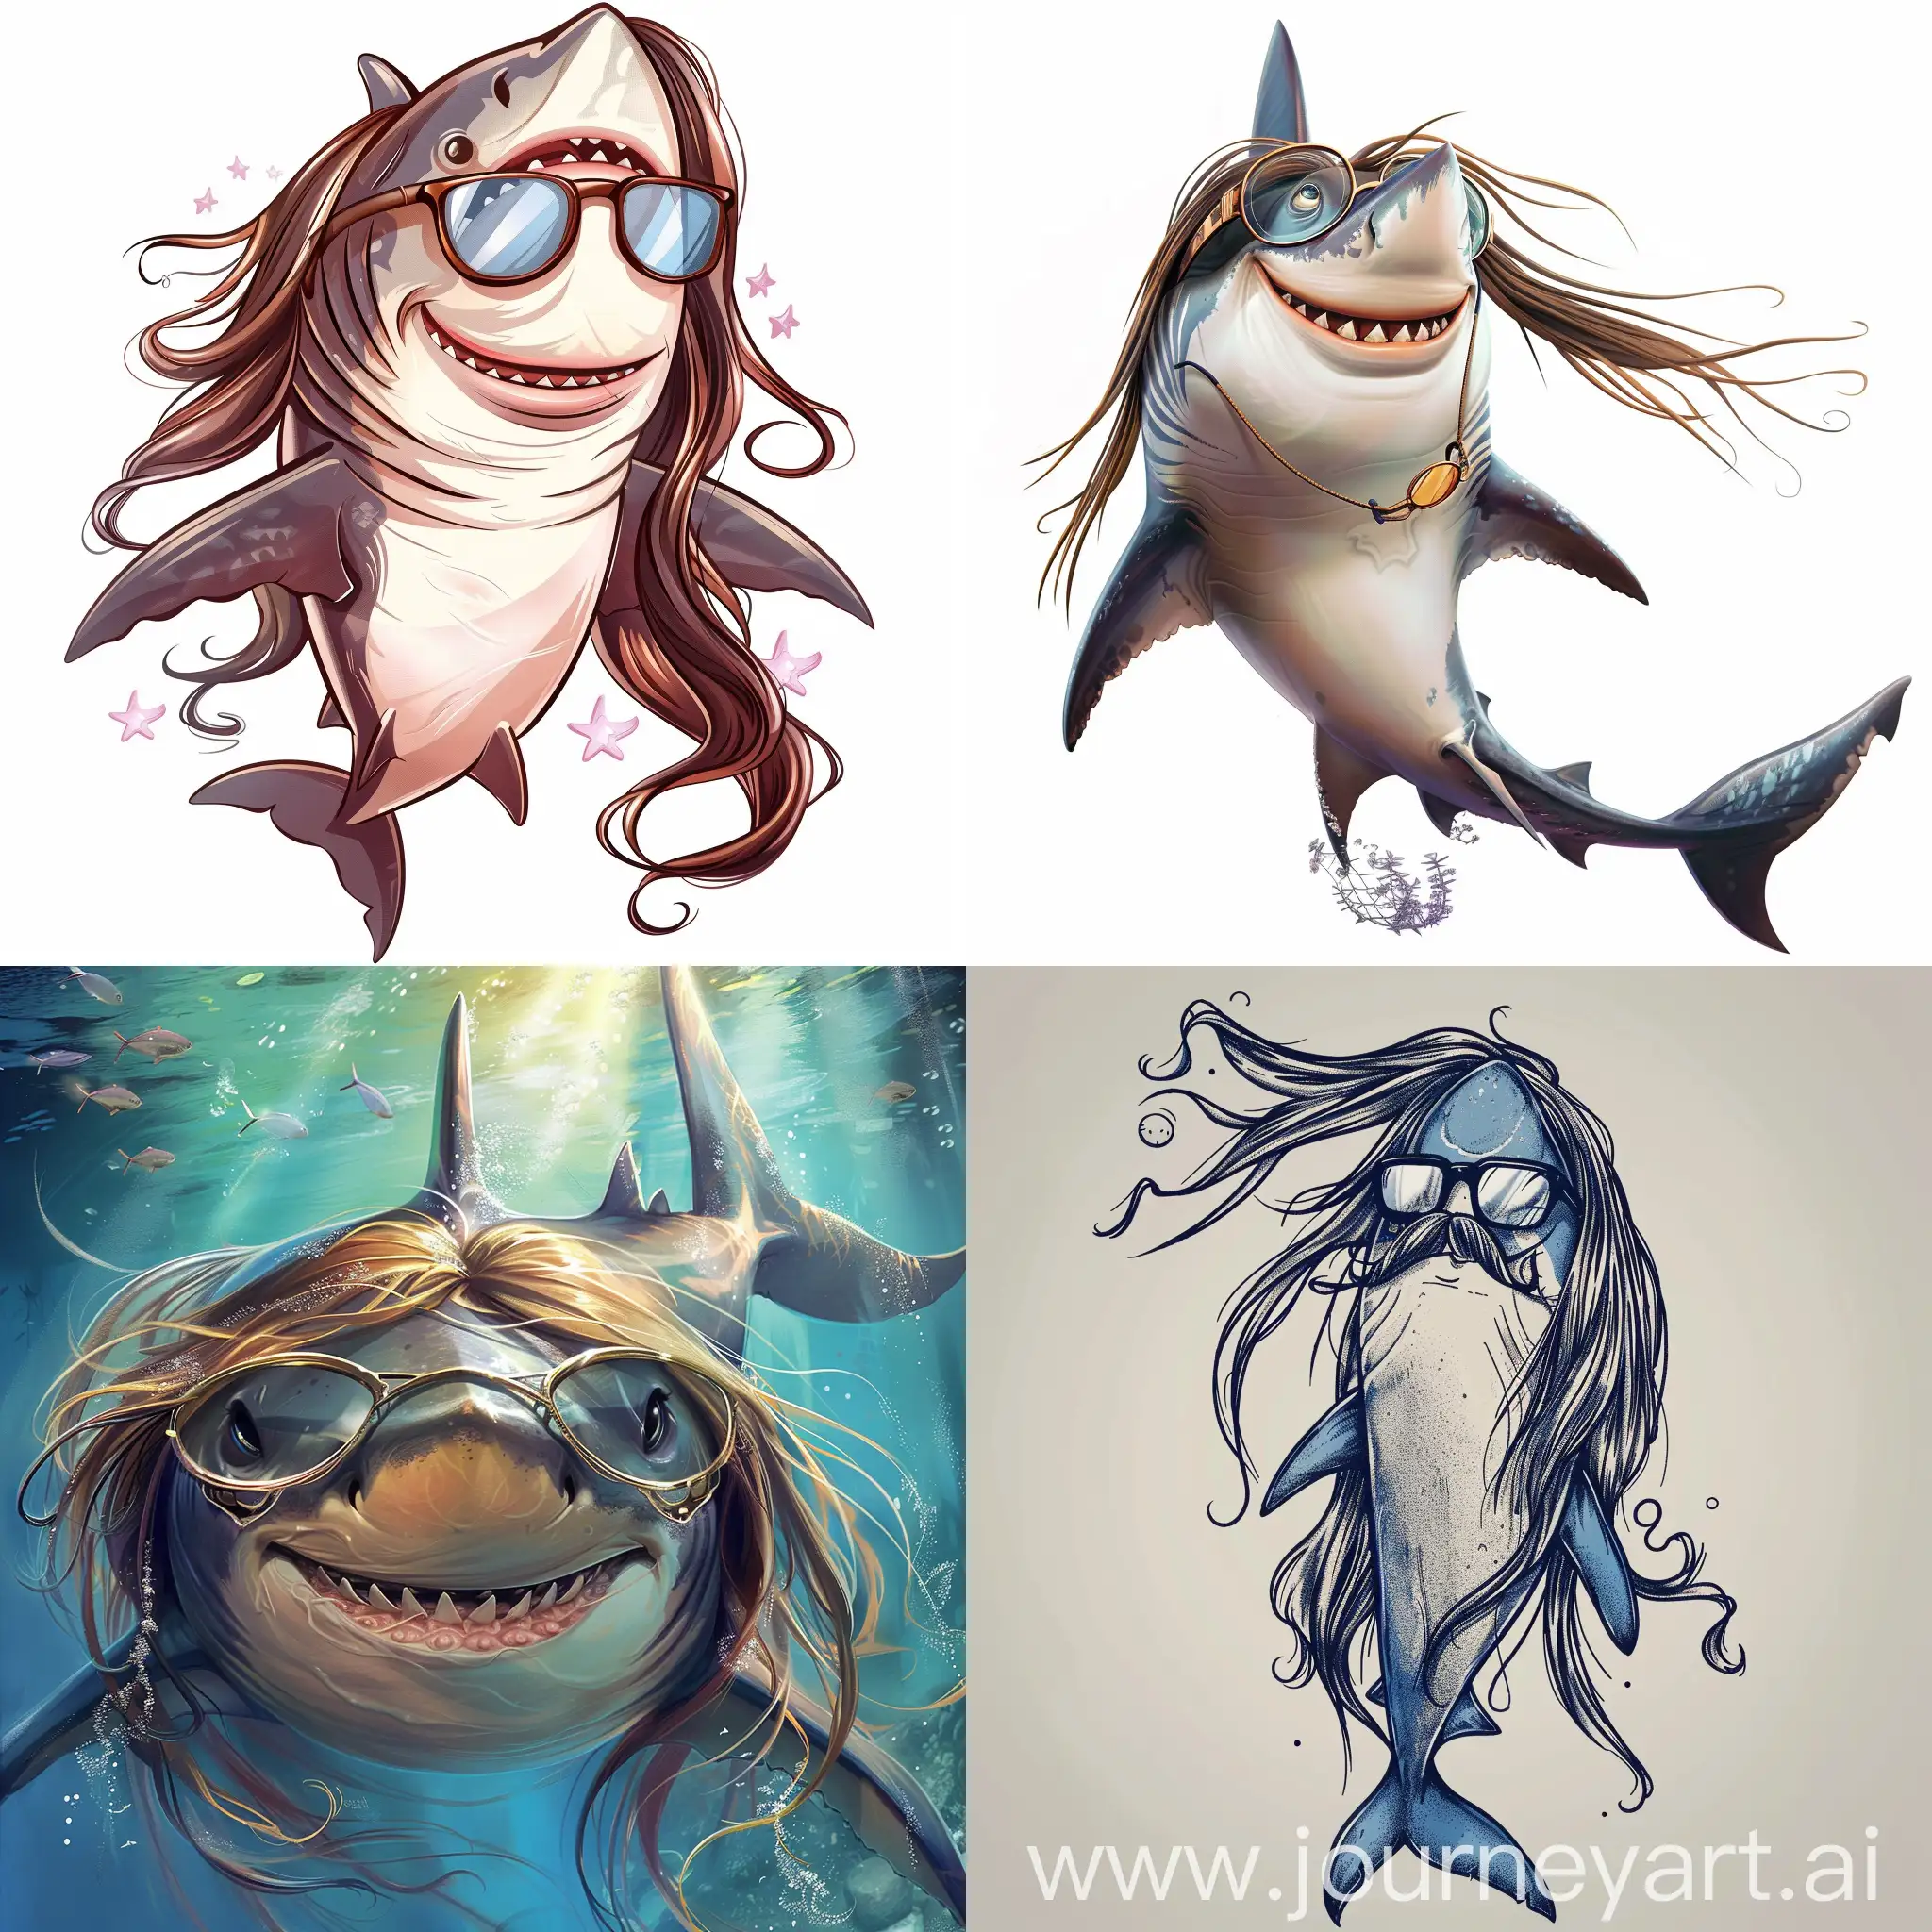 Stylish-Shark-with-Glasses-and-Flowing-Locks